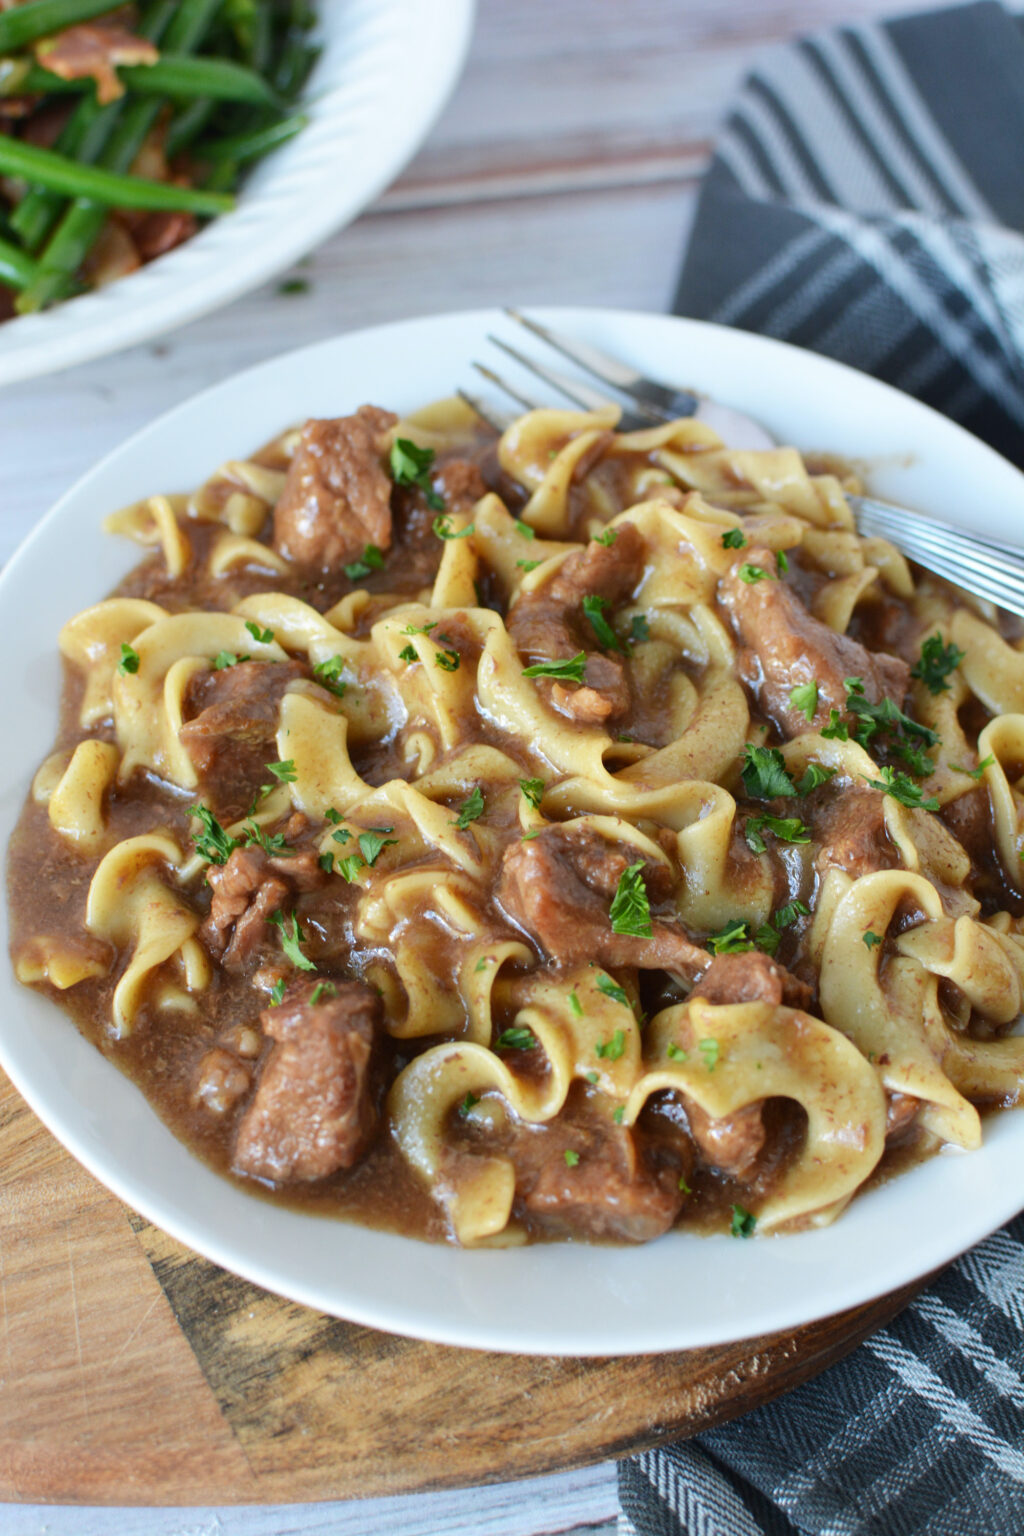 Beef with noodles recipe